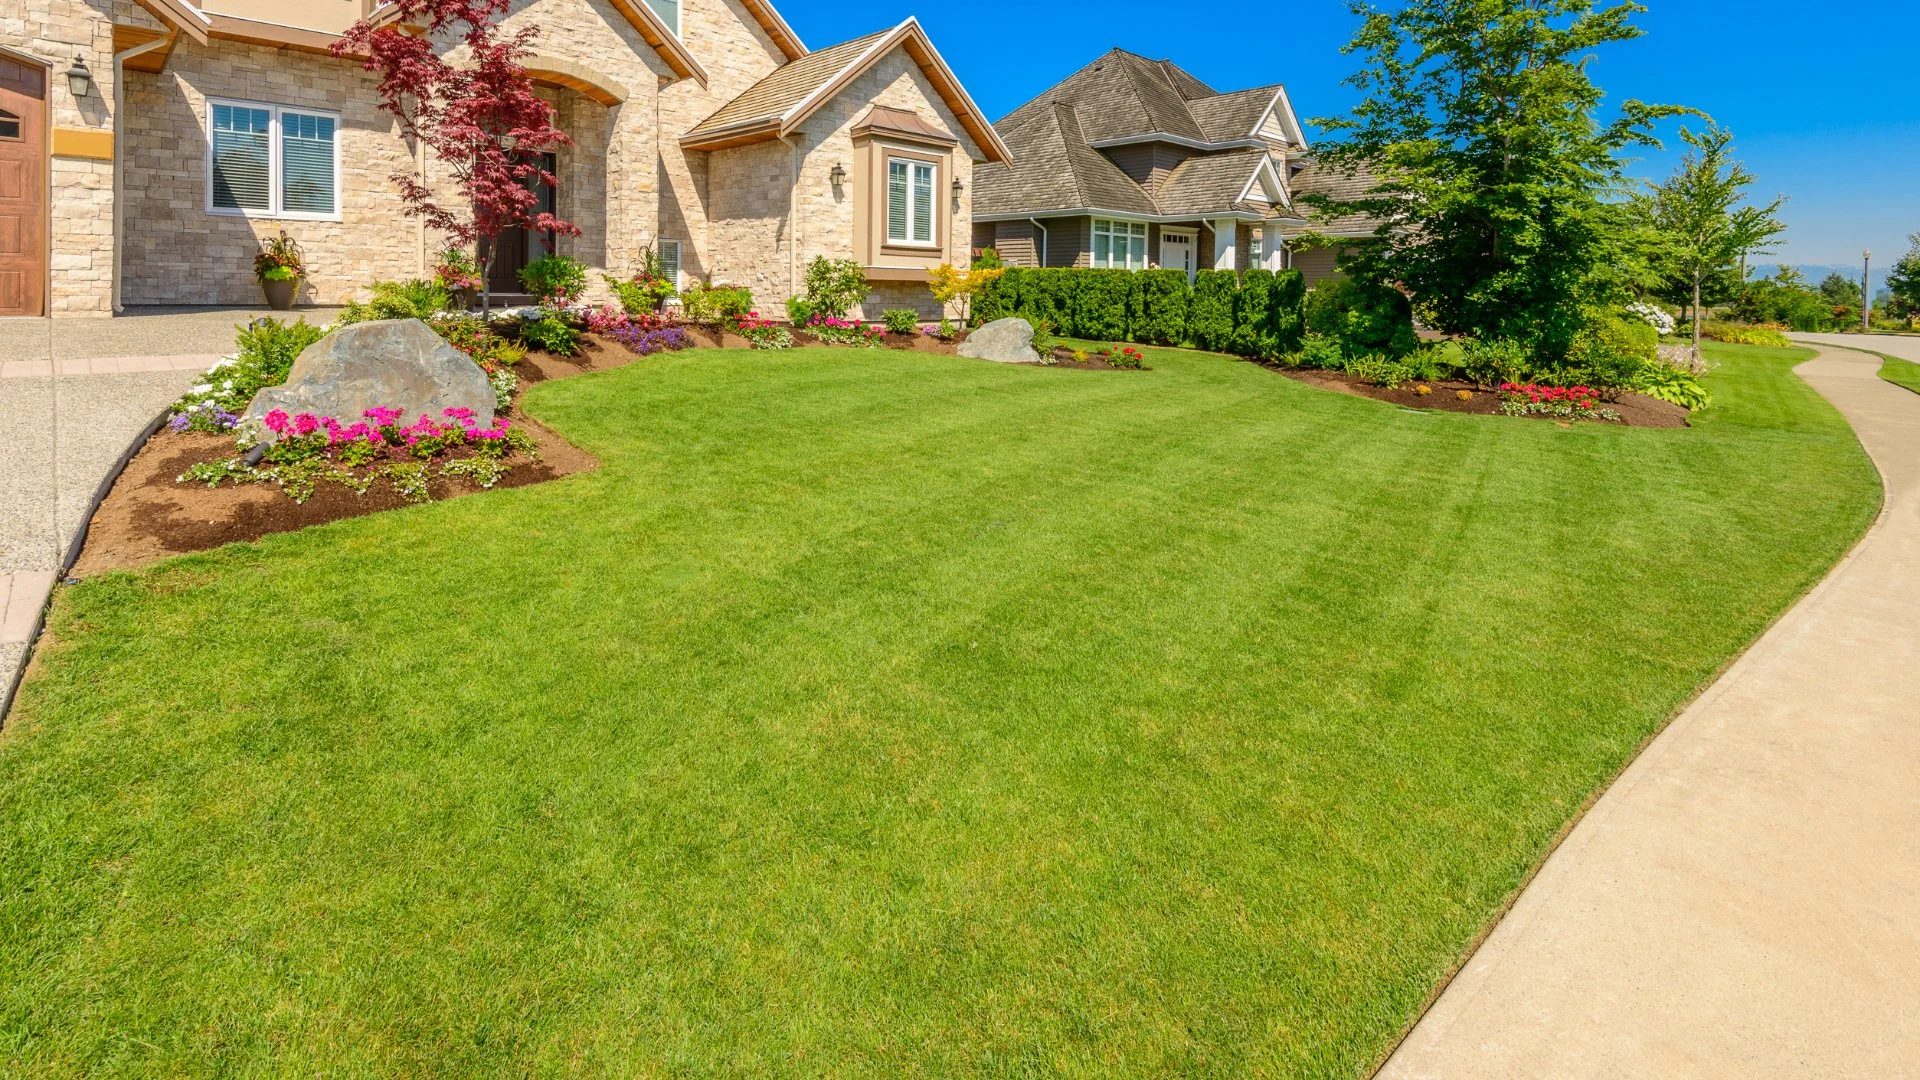 A large green lawn in front of our client's home in West Chester, PA. 